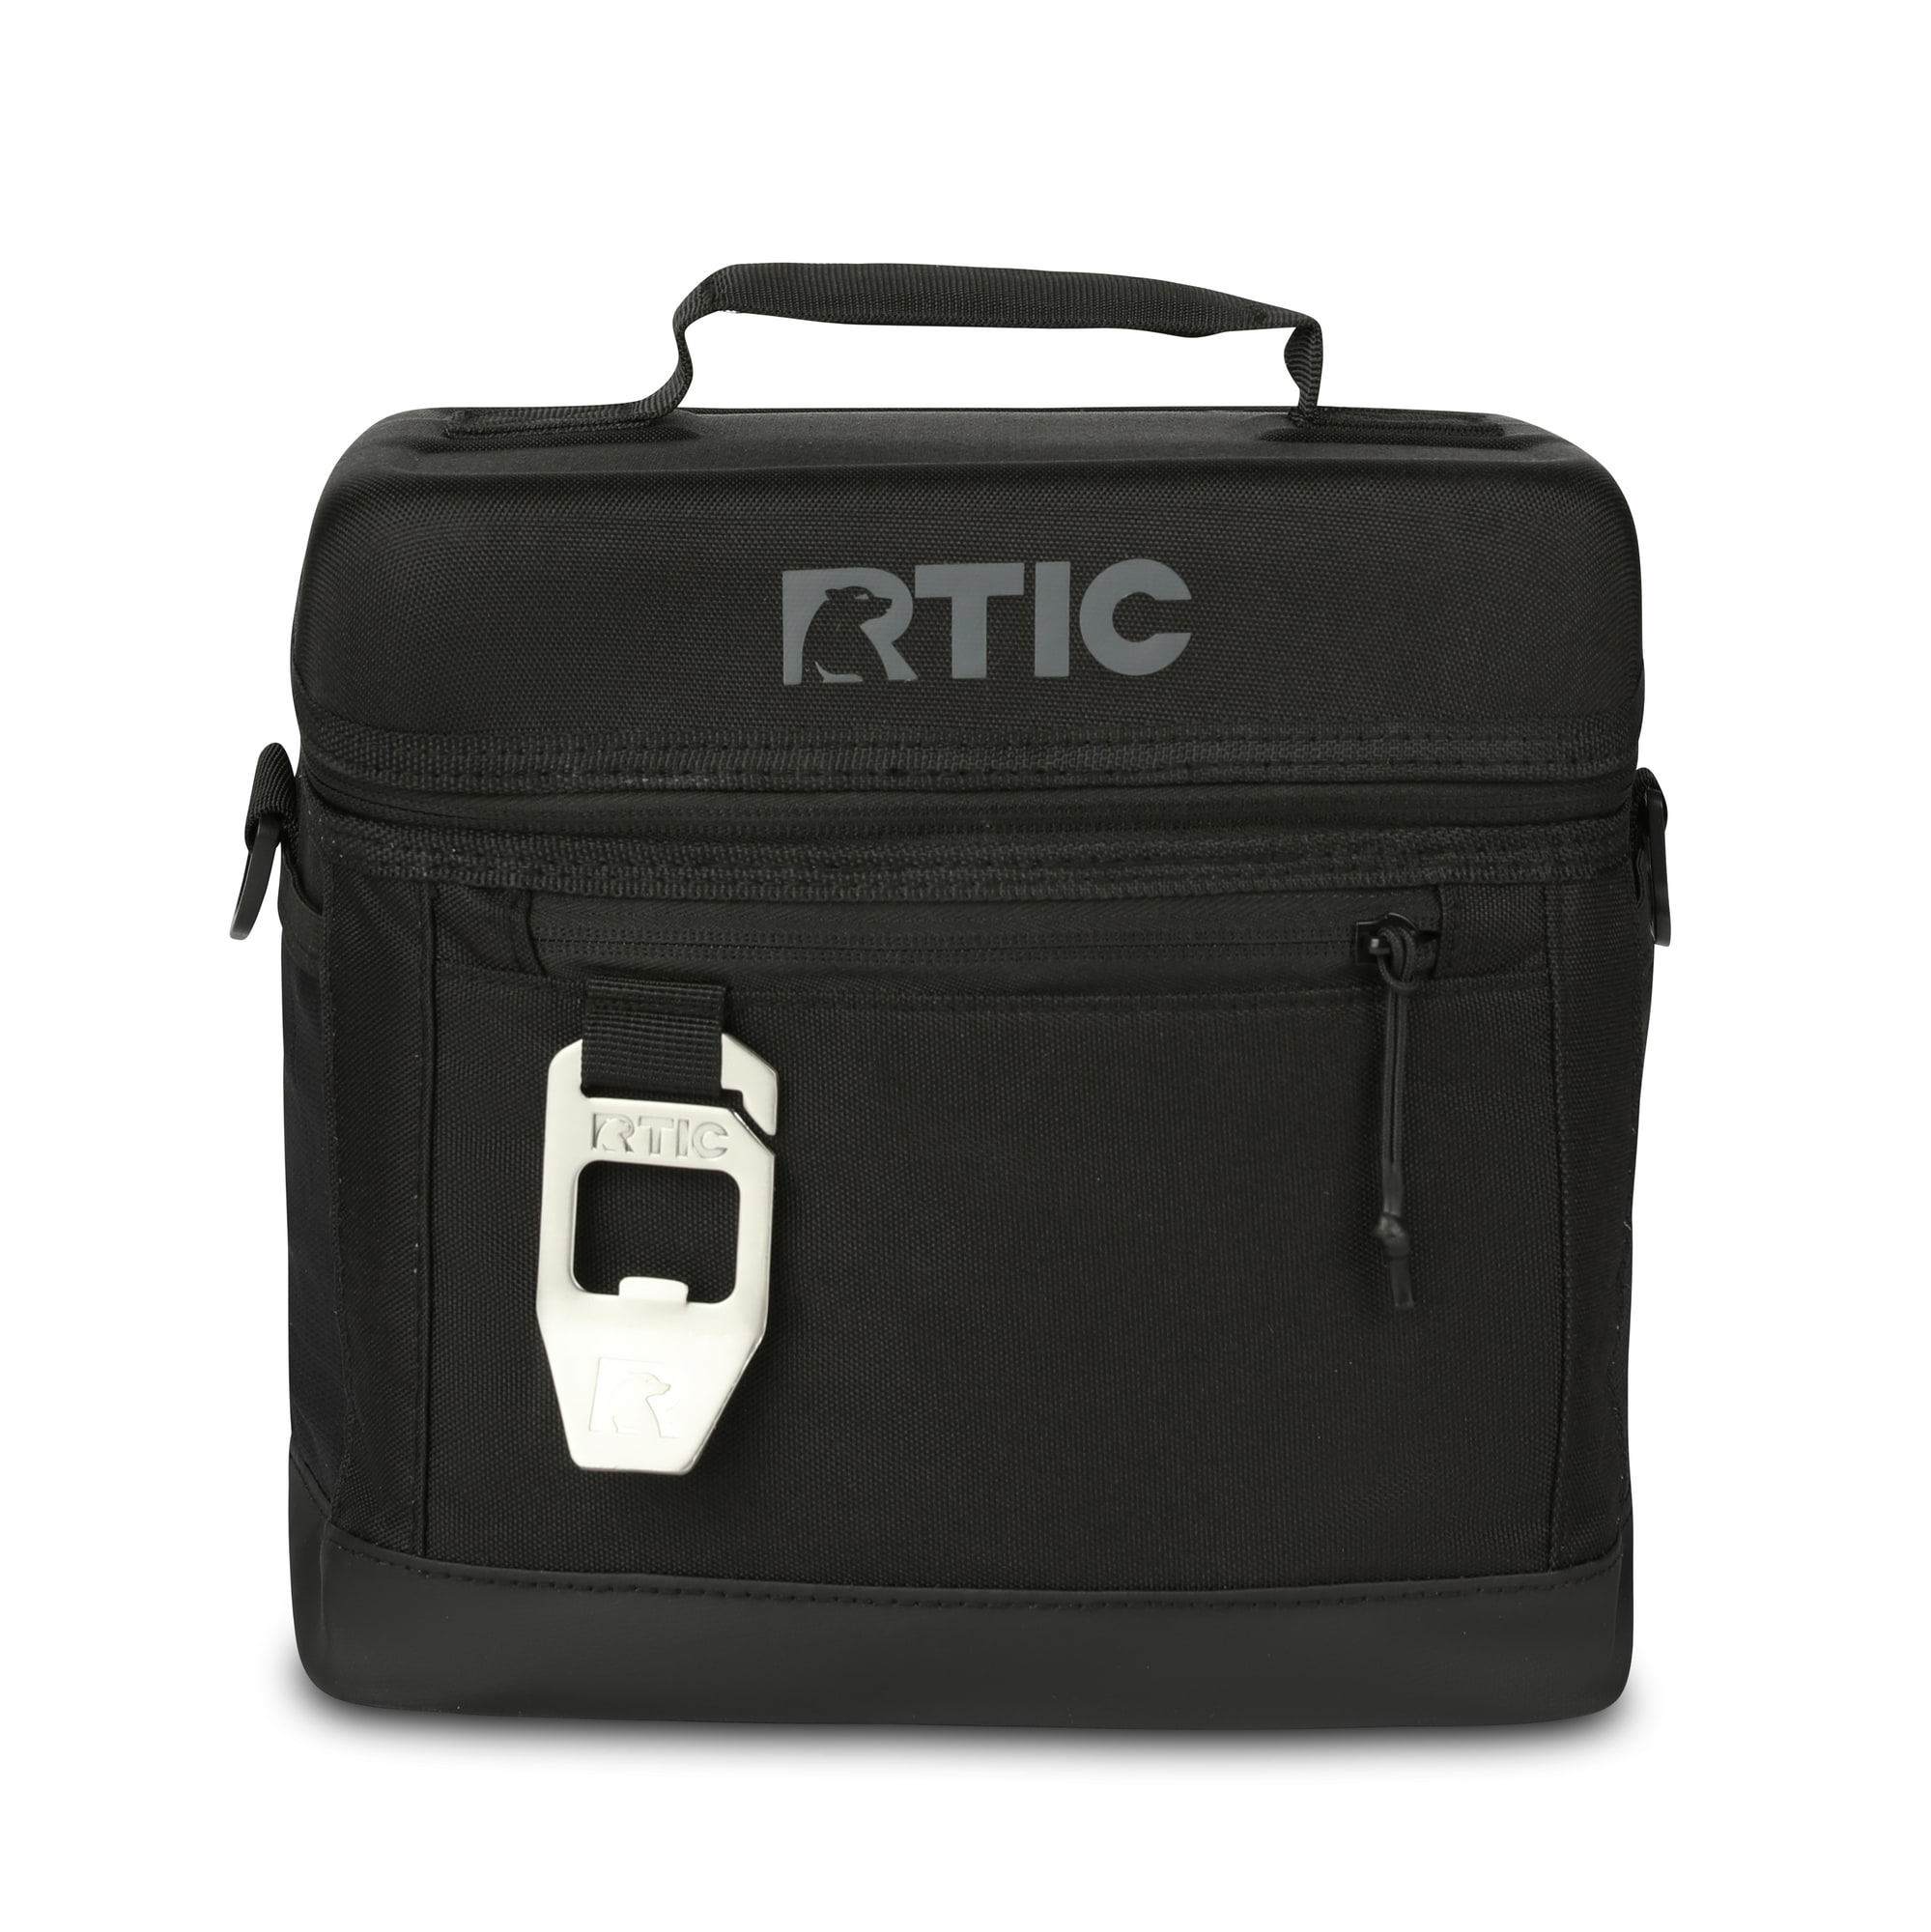 RTIC Outdoors 20 Cans Soft Sided Cooler - Black